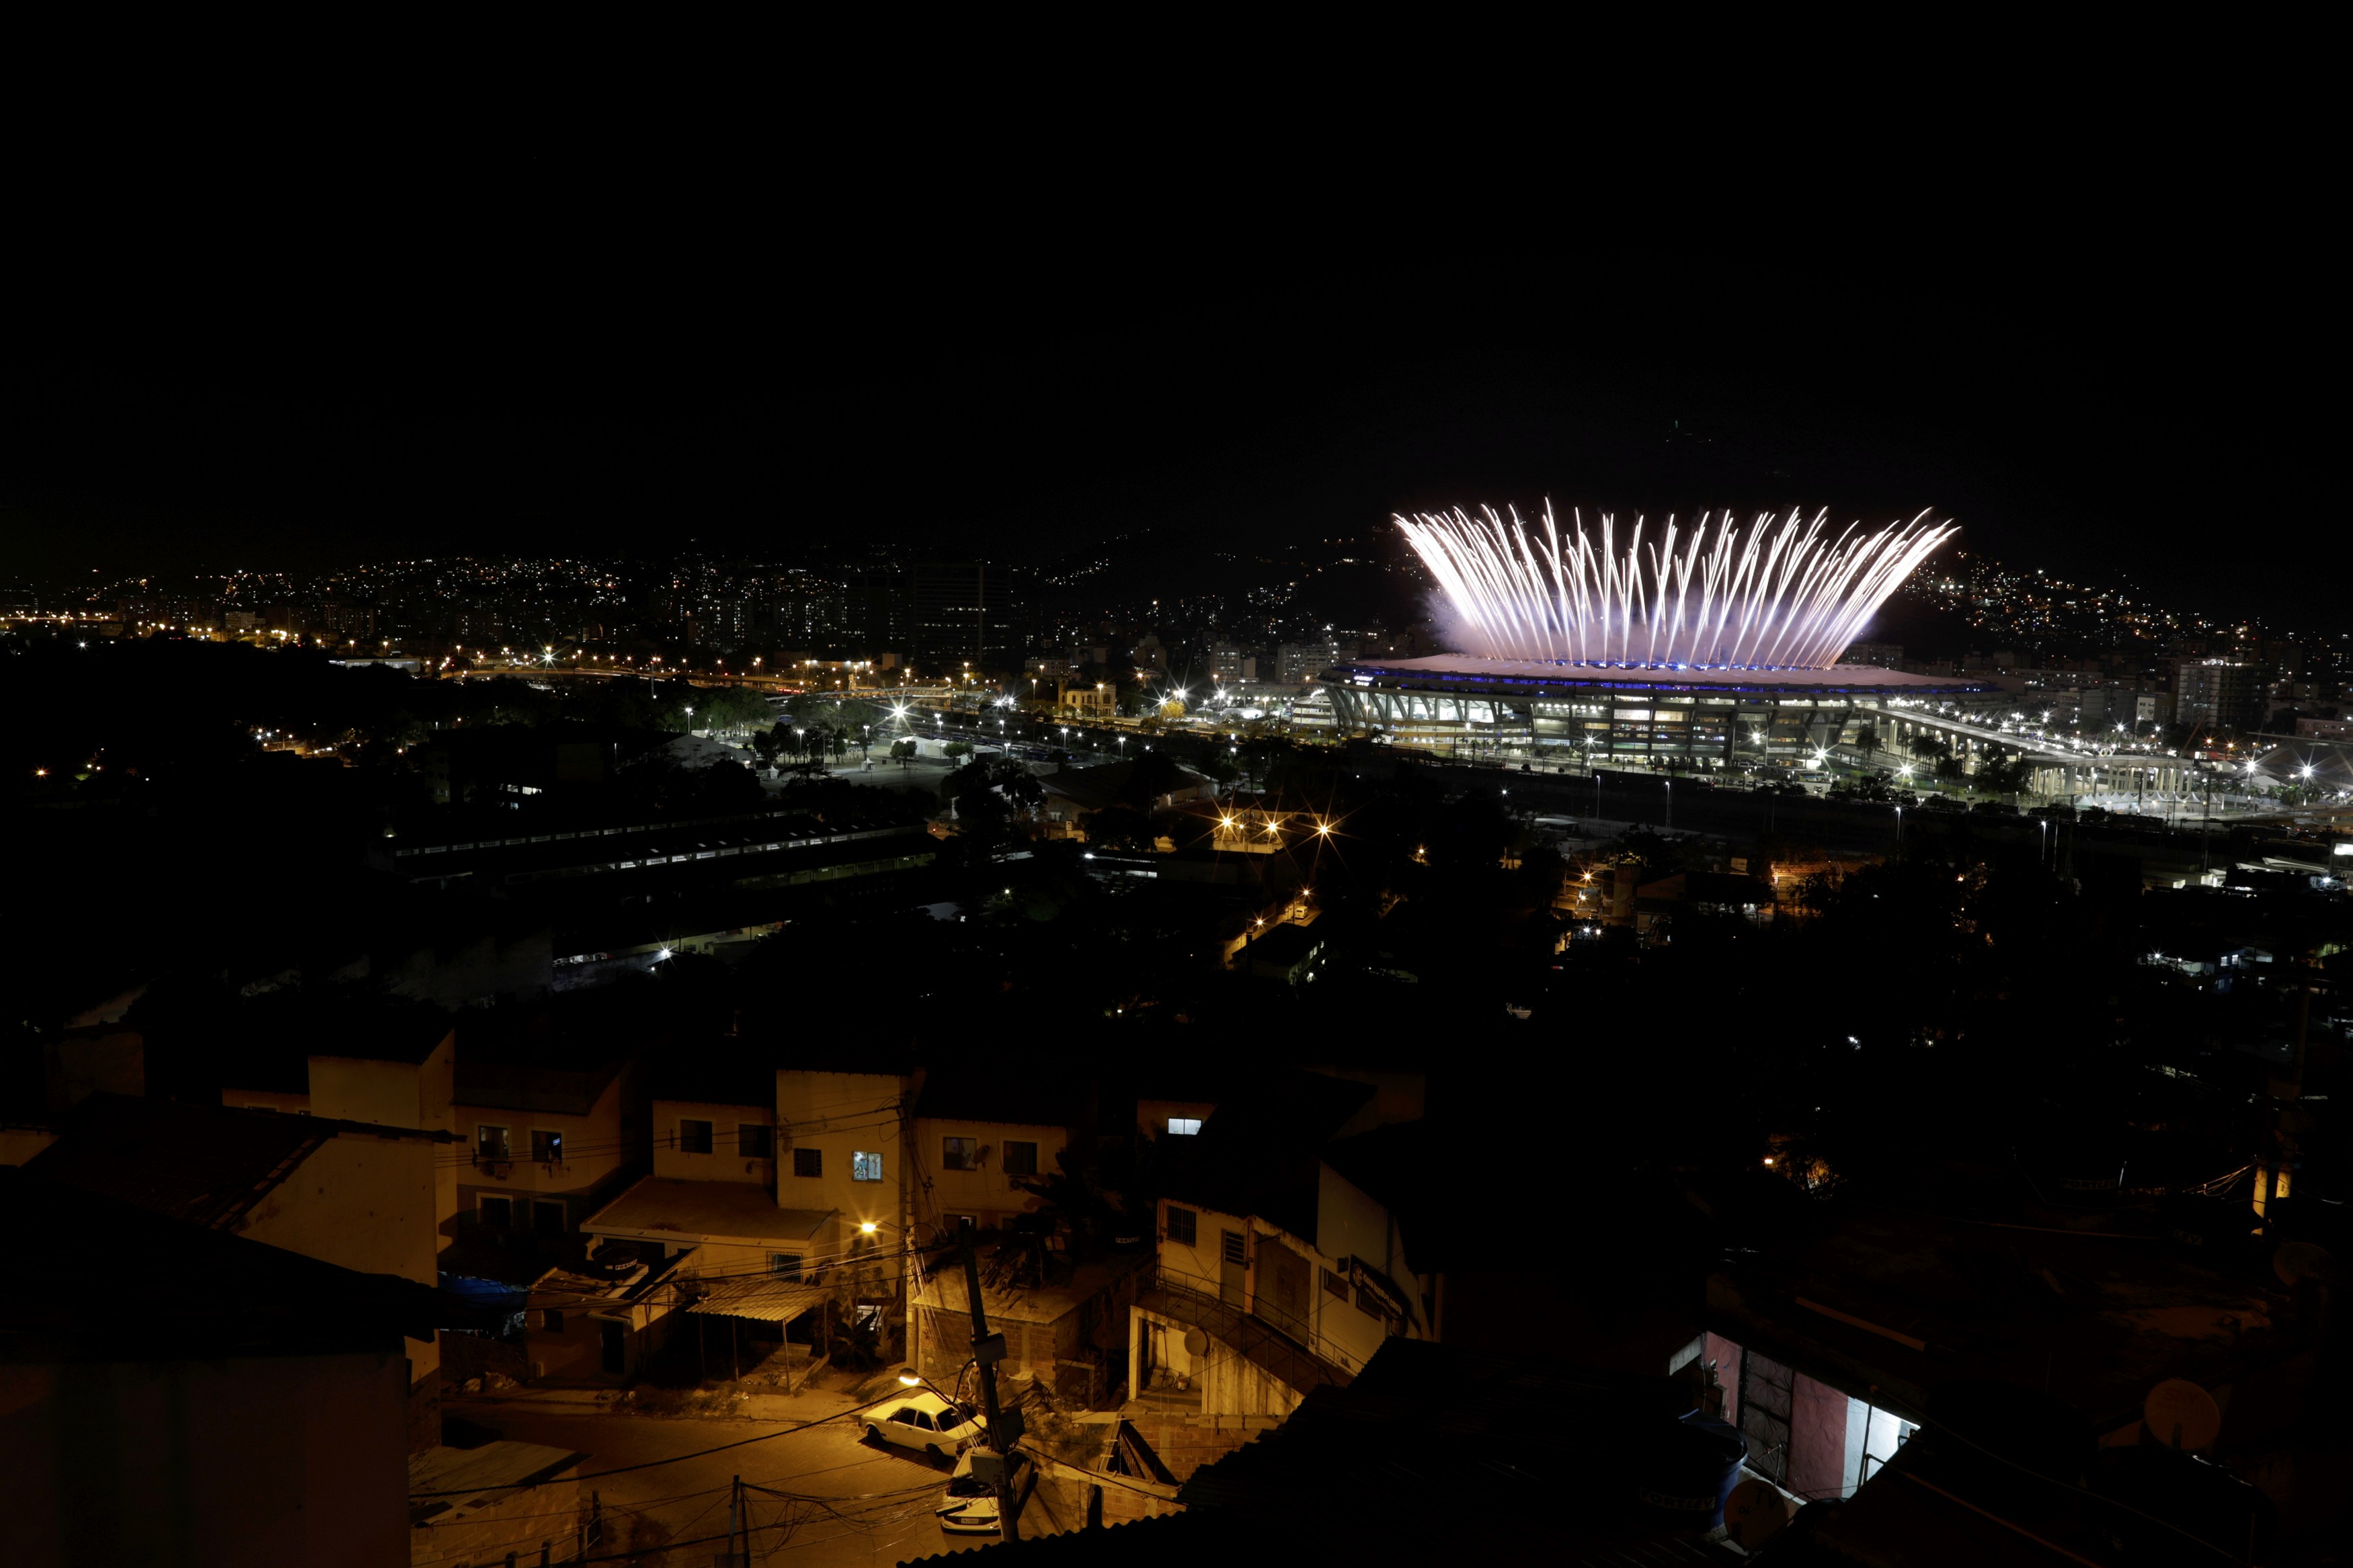 2016 Rio Olympics - Opening Ceremony - Maracana - Rio de Janeiro, Brazil - 05/08/2016. The Maracana Olympic Stadium during the opening ceremony is seen from the Mangueira favela slum. REUTERS/Ricardo Moraes TPX IMAGES OF THE DAY FOR EDITORIAL USE ONLY. NOT FOR SALE FOR MARKETING OR ADVERTISING CAMPAIGNS.